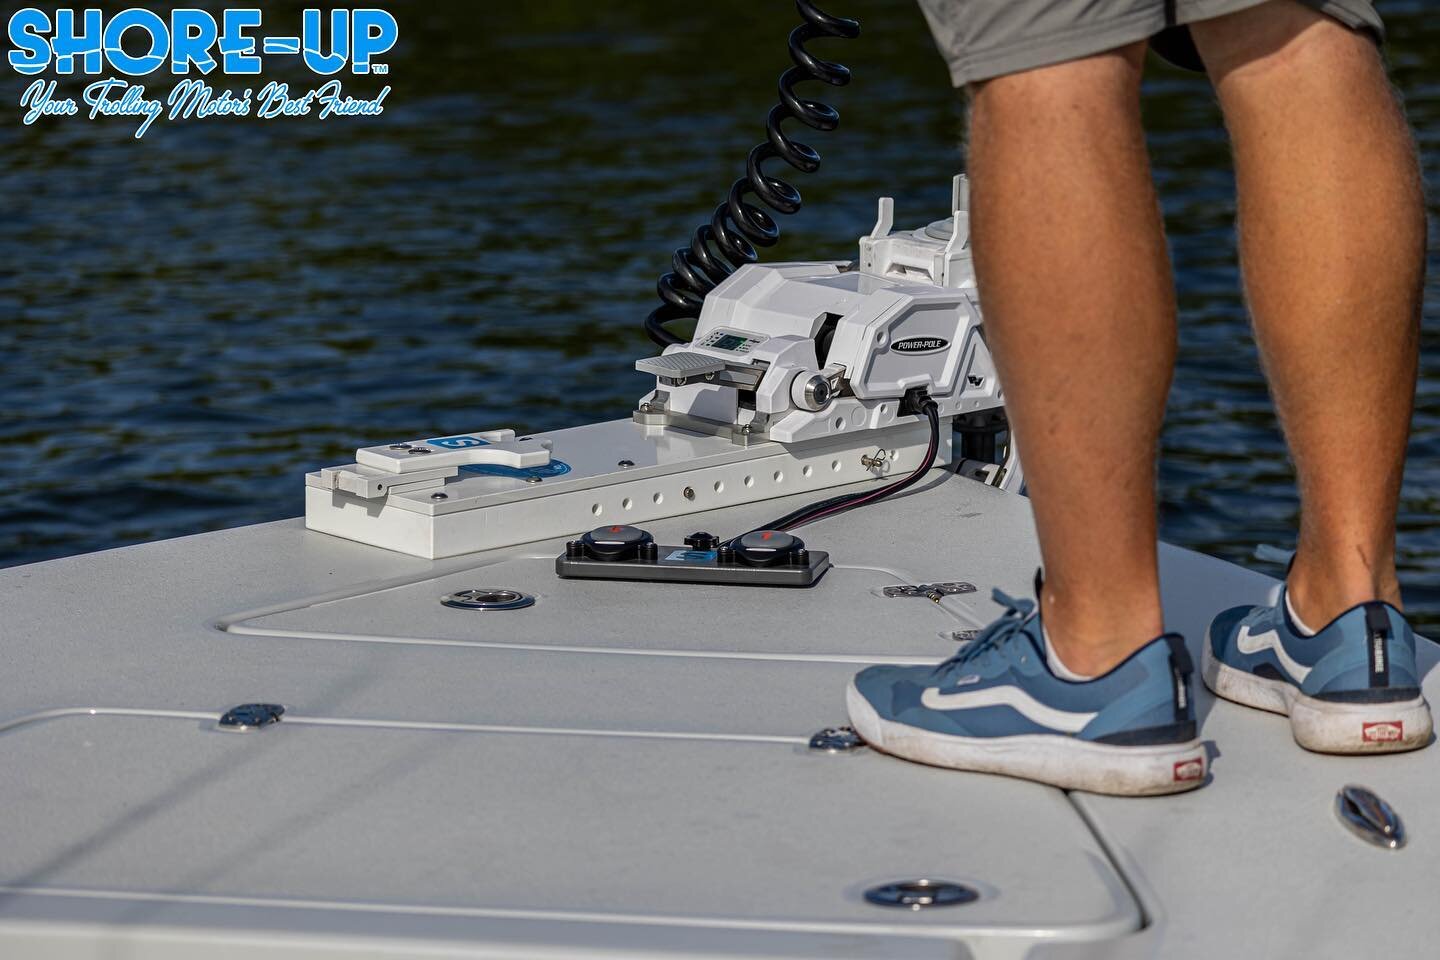 To say that this is the best-designed trolling motor mount on the market today is an understatement.⠀
⠀
⠀
⠀
⠀
#shoreup #fishing #trollingmotor #shoreupsystems